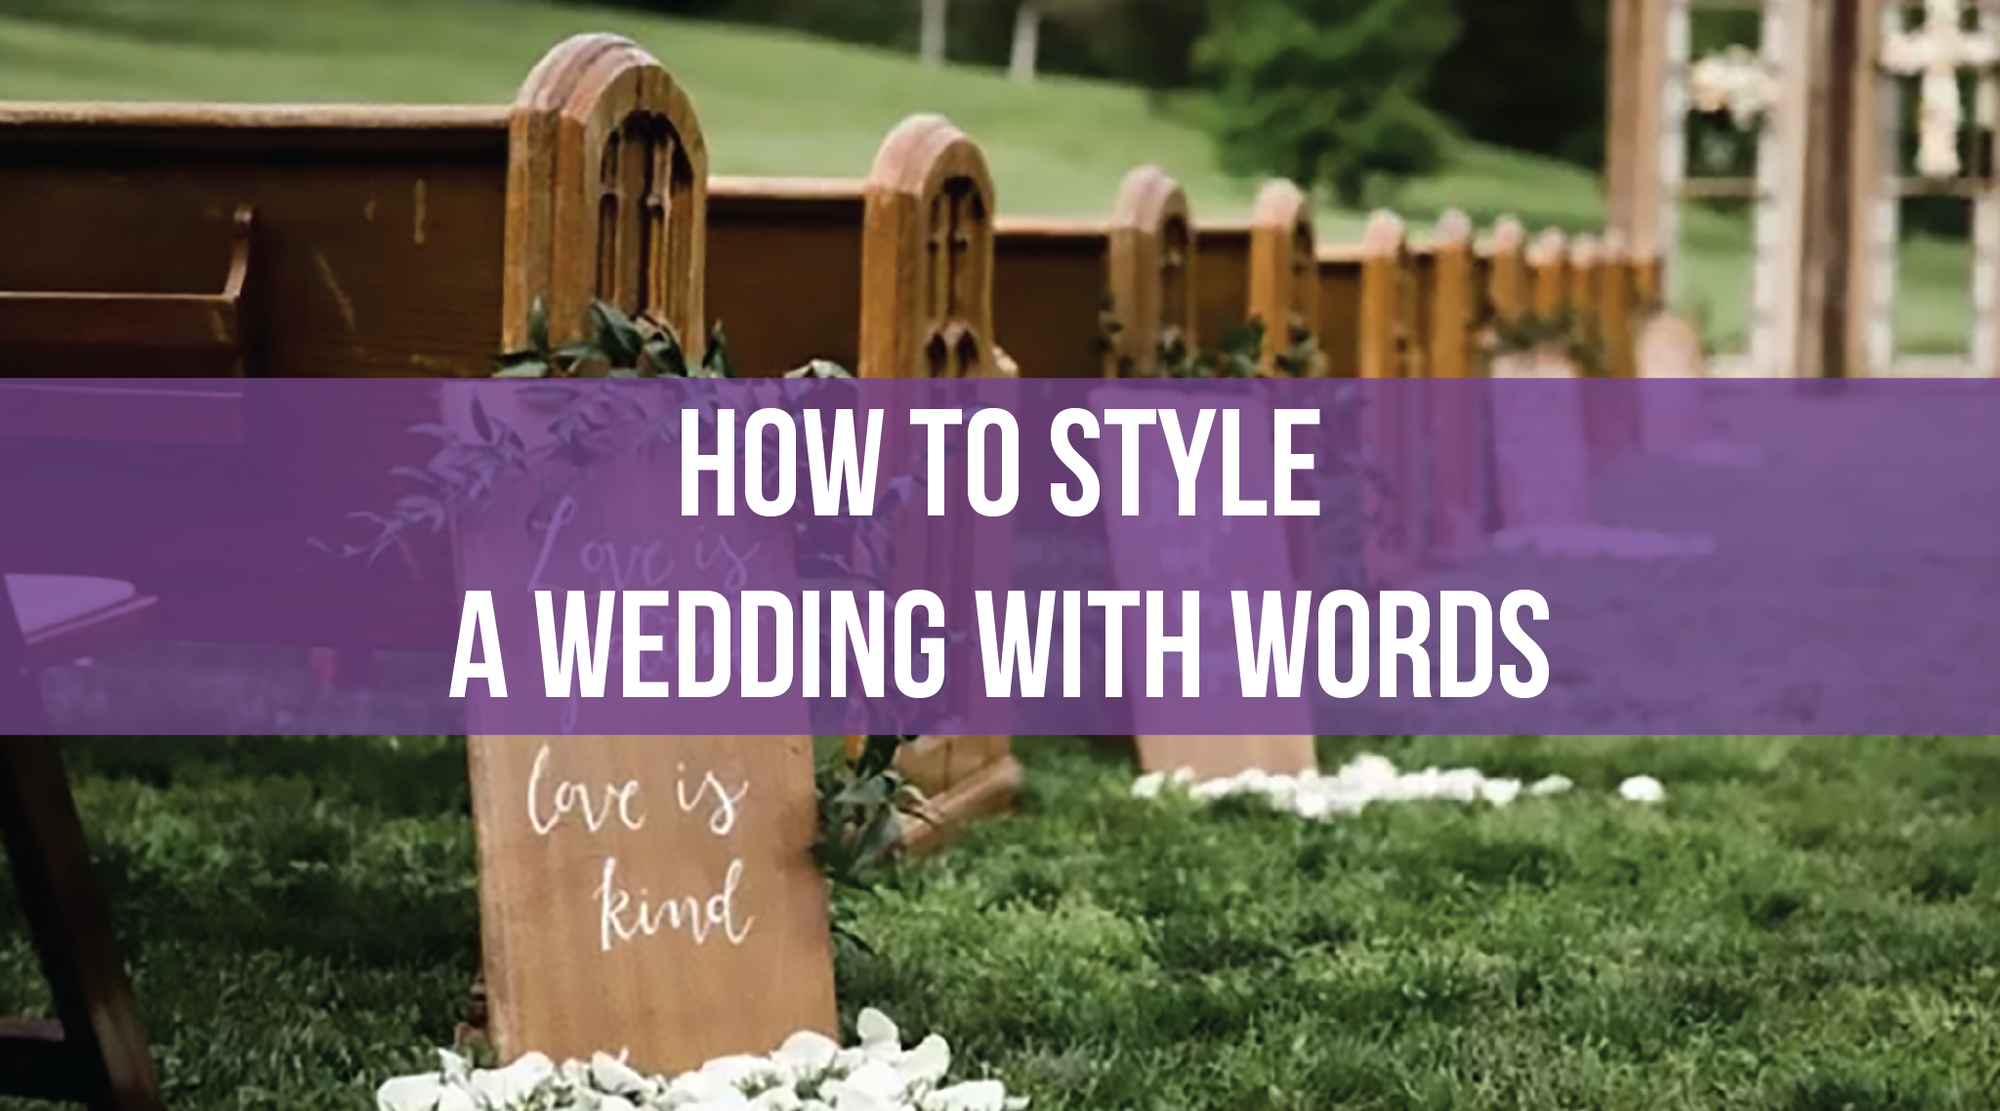 How to Style a Wedding with Words